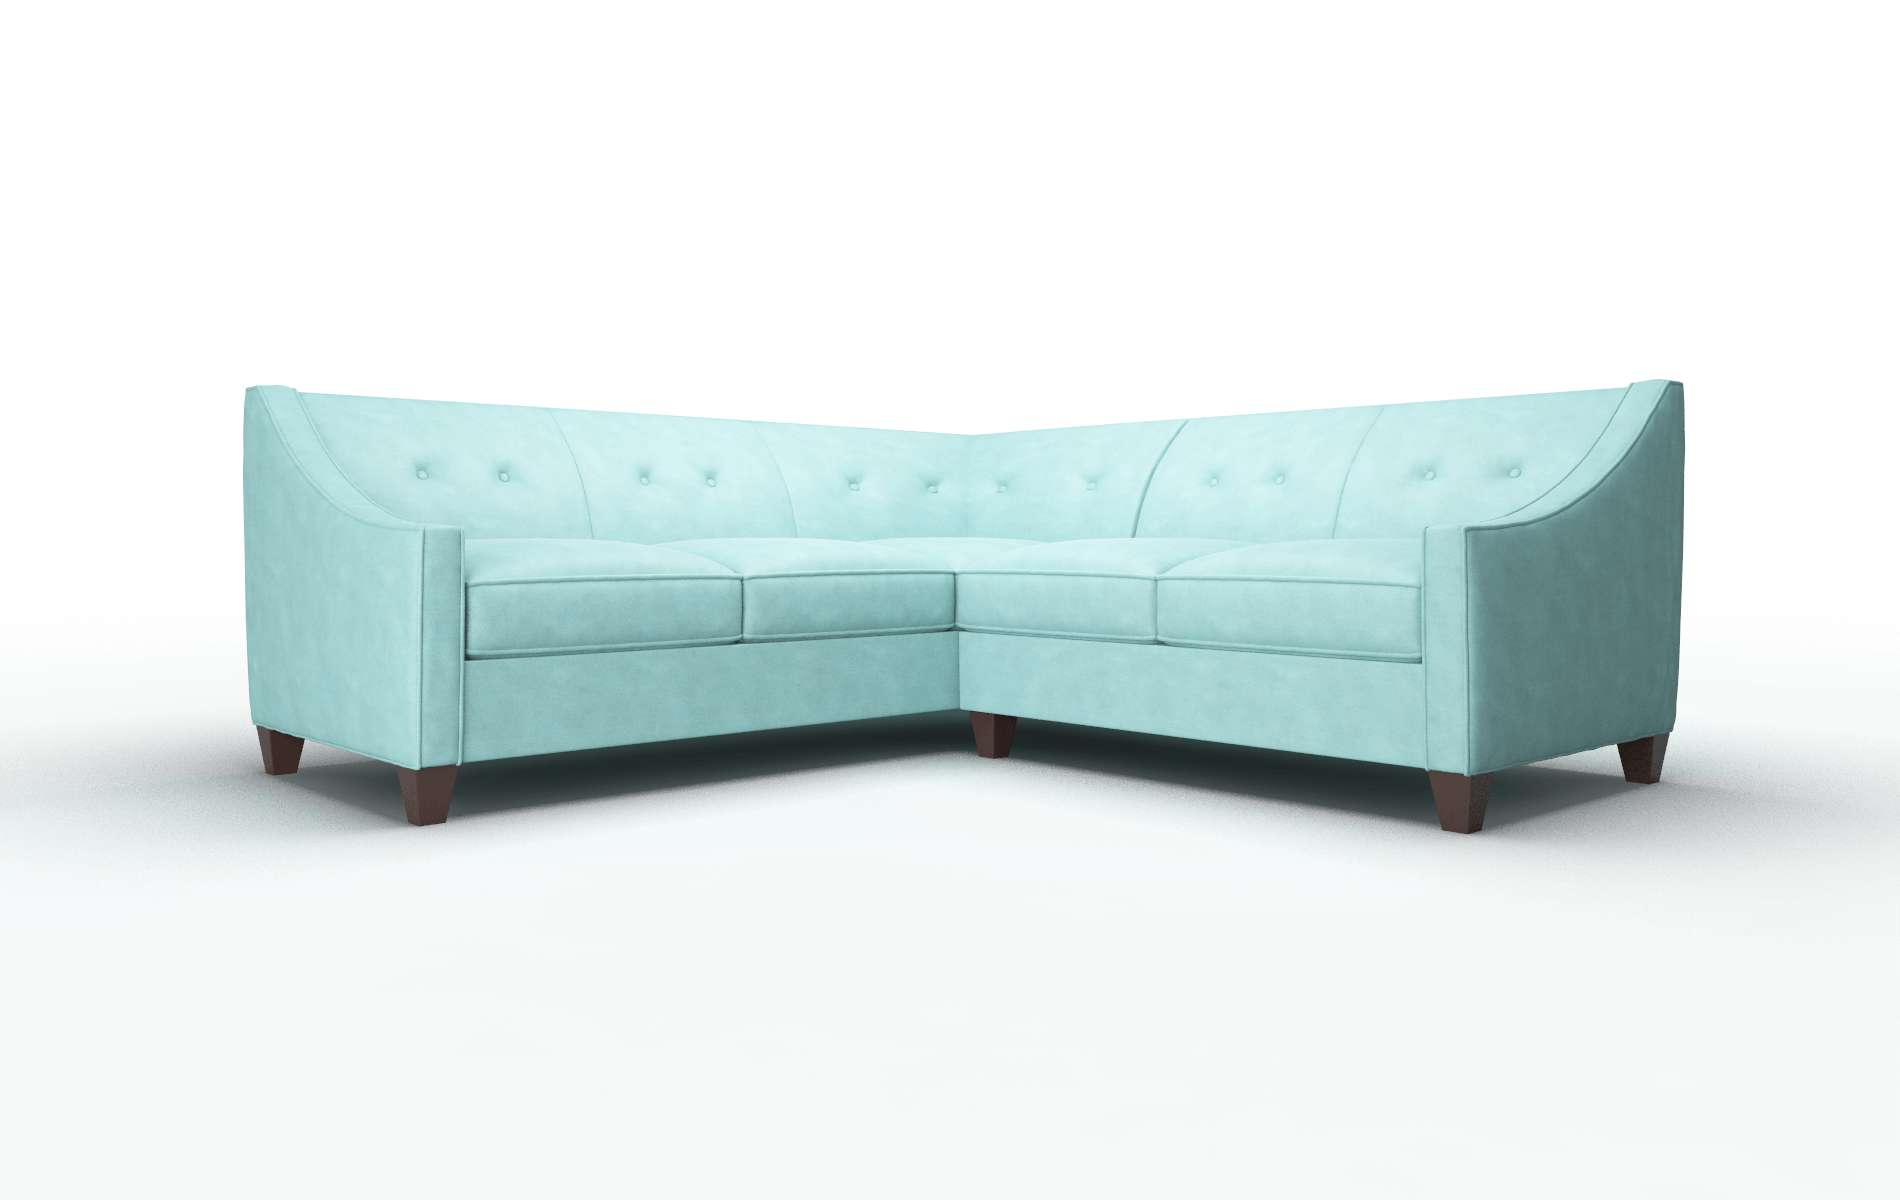 Berlin Curious Turquoise Sectional espresso legs